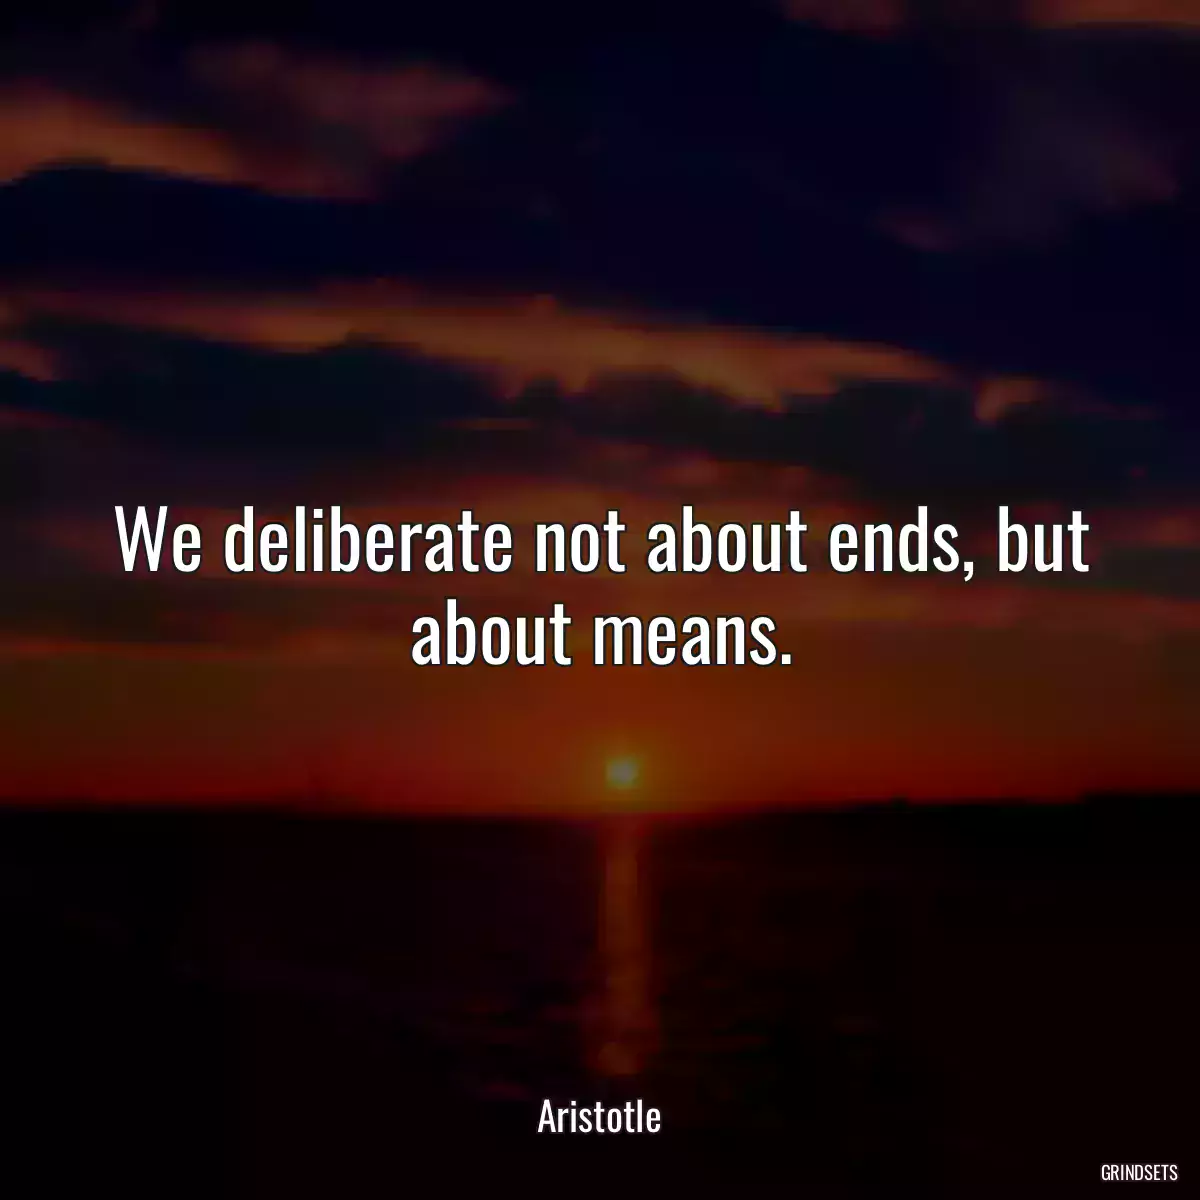 We deliberate not about ends, but about means.